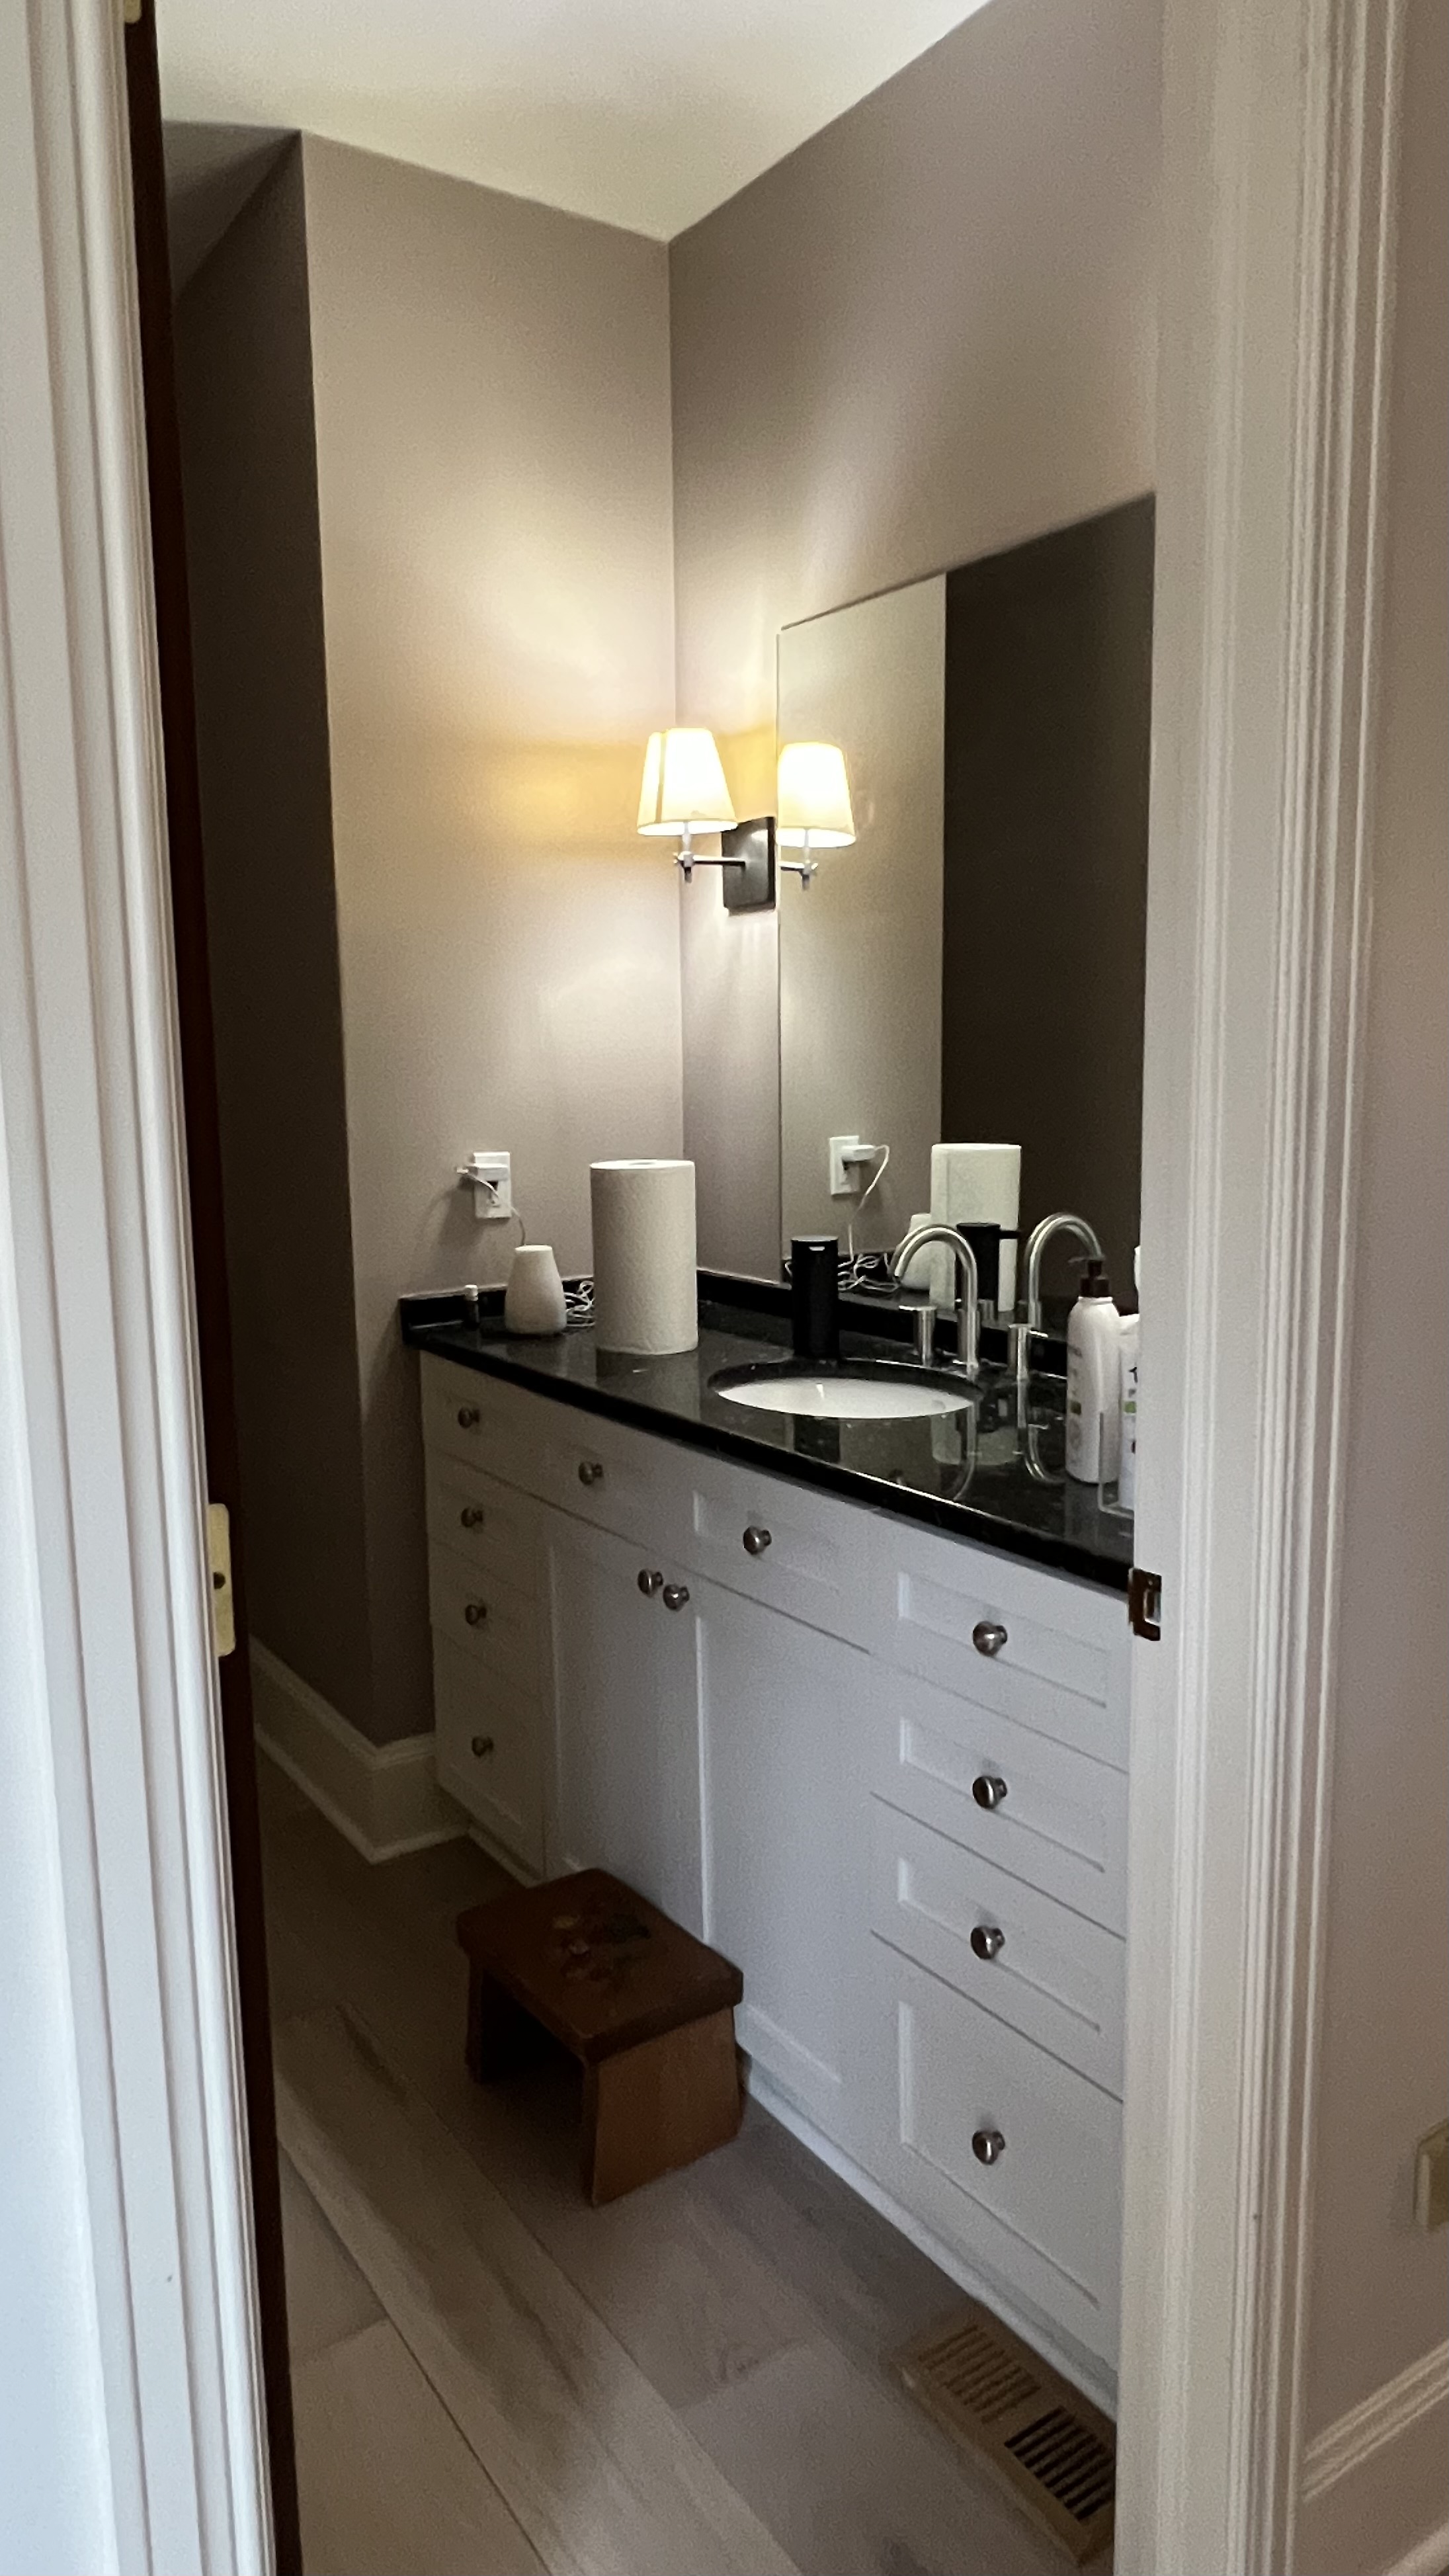 Photo of a bathroom with a white sink, black countertop, and square mirror.